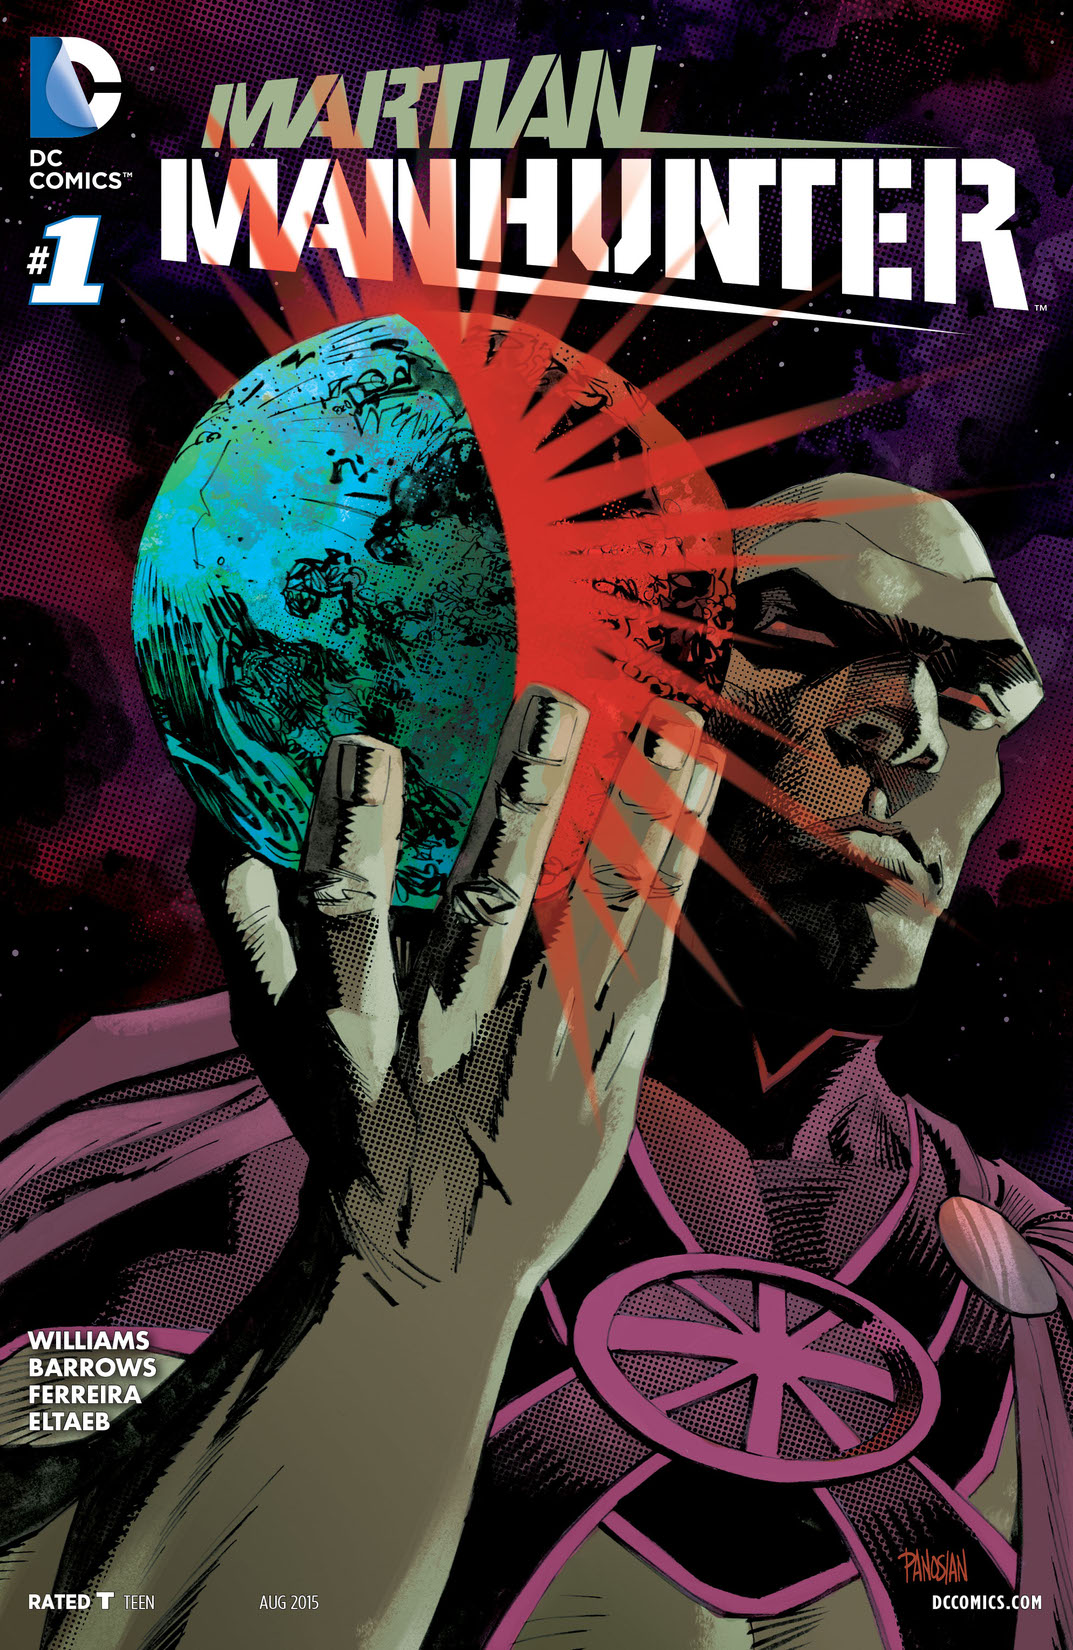 Martian Manhunter (2015-) #1 preview images